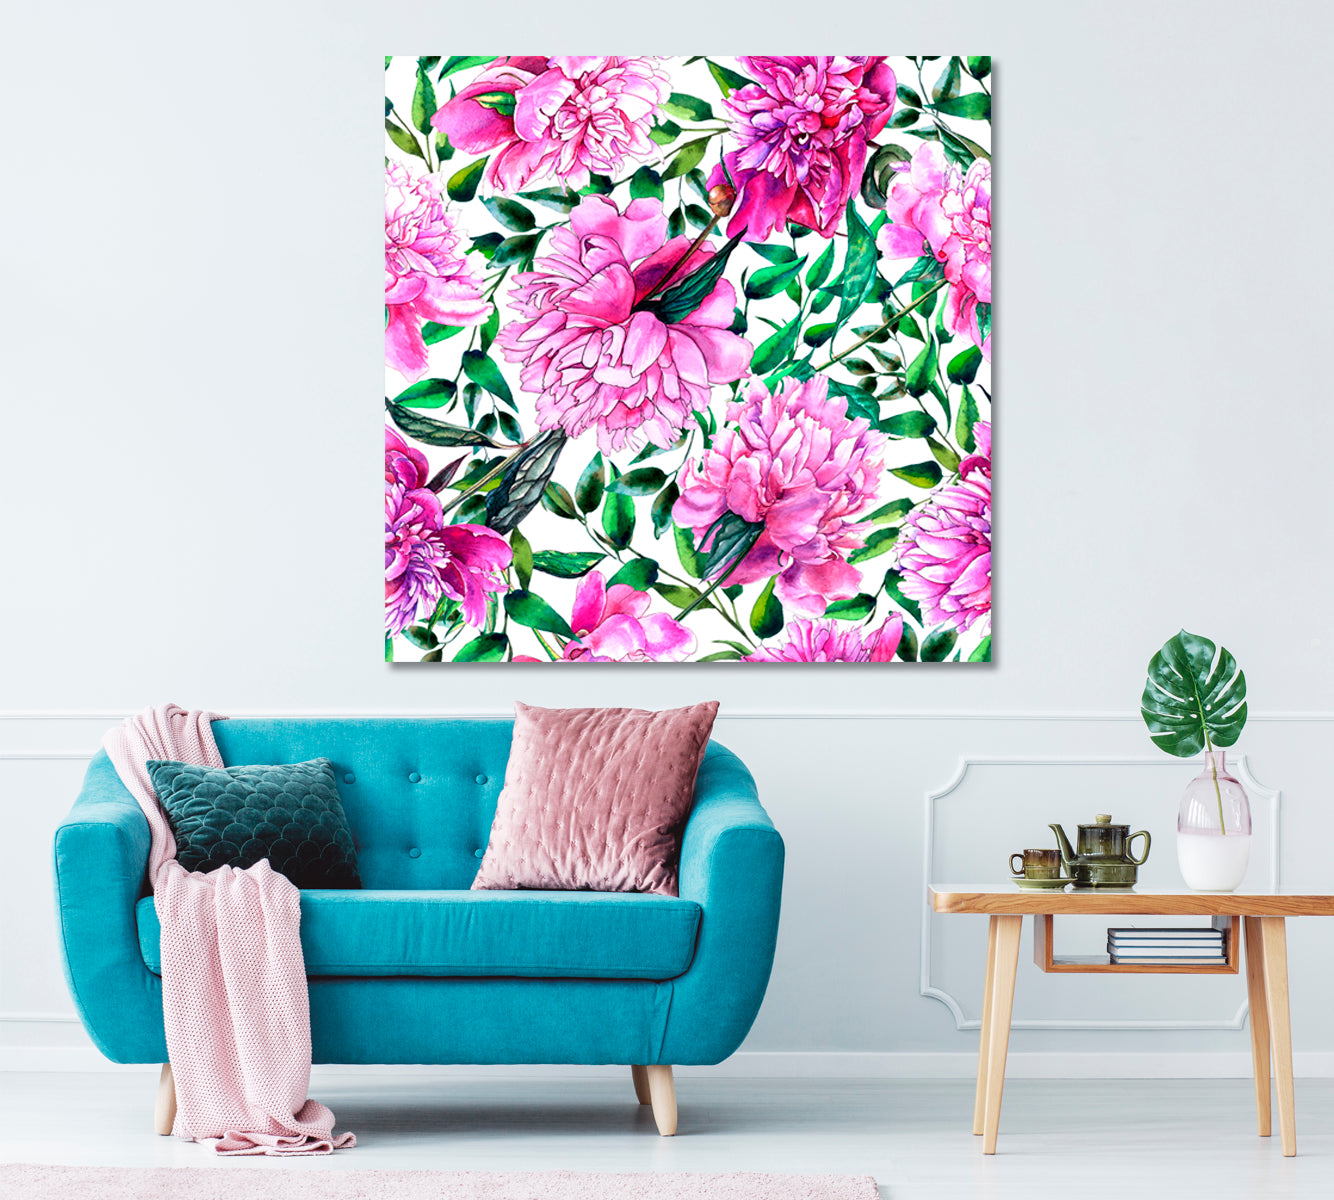 Pink Peonies Canvas Print ArtLexy 1 Panel 12"x12" inches 